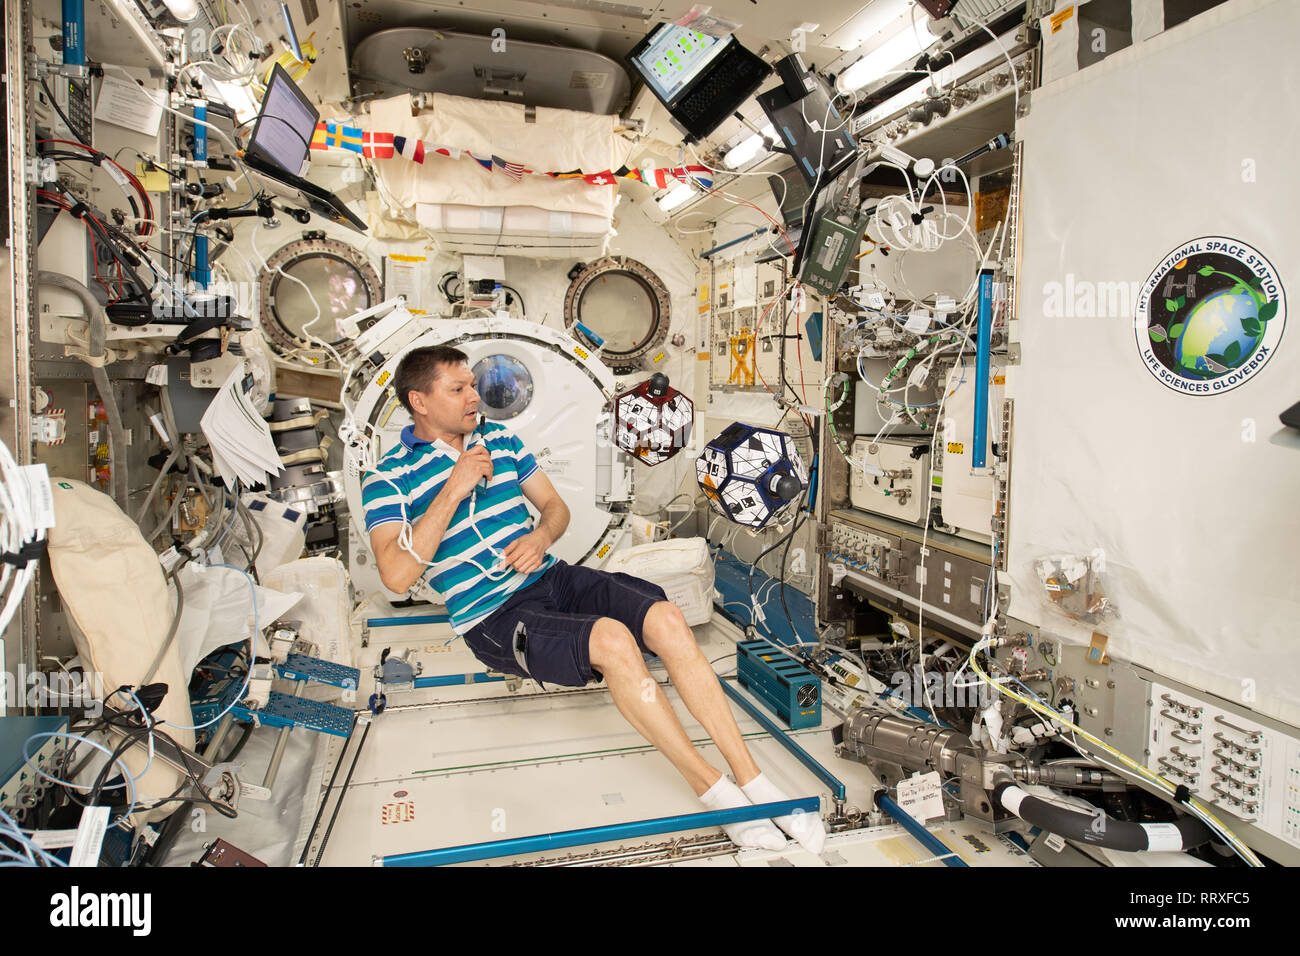 Commander Oleg Kononenko works inside the Japanese Kibo lab module monitoring a pair of tiny internal free-flying satellites known as SPHERES aboard the International Space Station January 14, 2019 in Earth Orbit. High school students compete to design the best algorithms that control the basketball-sized satellites to mimic spacecraft maneuvers and formation flying. Stock Photo